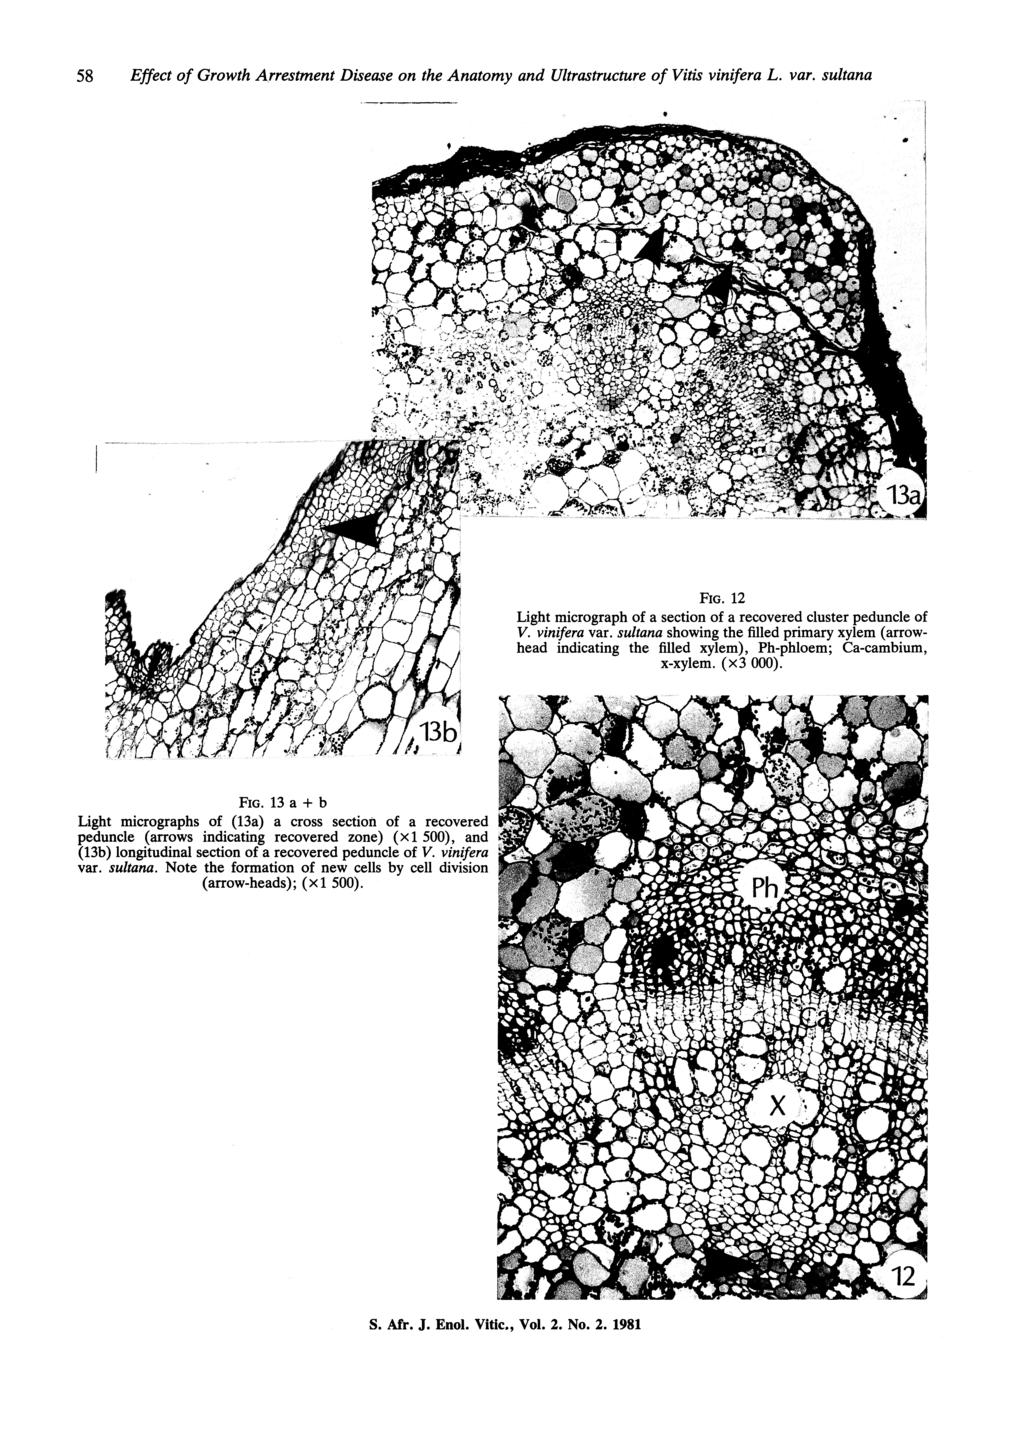 58 Effect of Growth Arrestment Disease on the Anatomy and Ultrastructure of Vitis vinifera L. var. sultana FIG. 12 Light micrograph of a section of a recovered cluster peduncle of V. vinifera var.